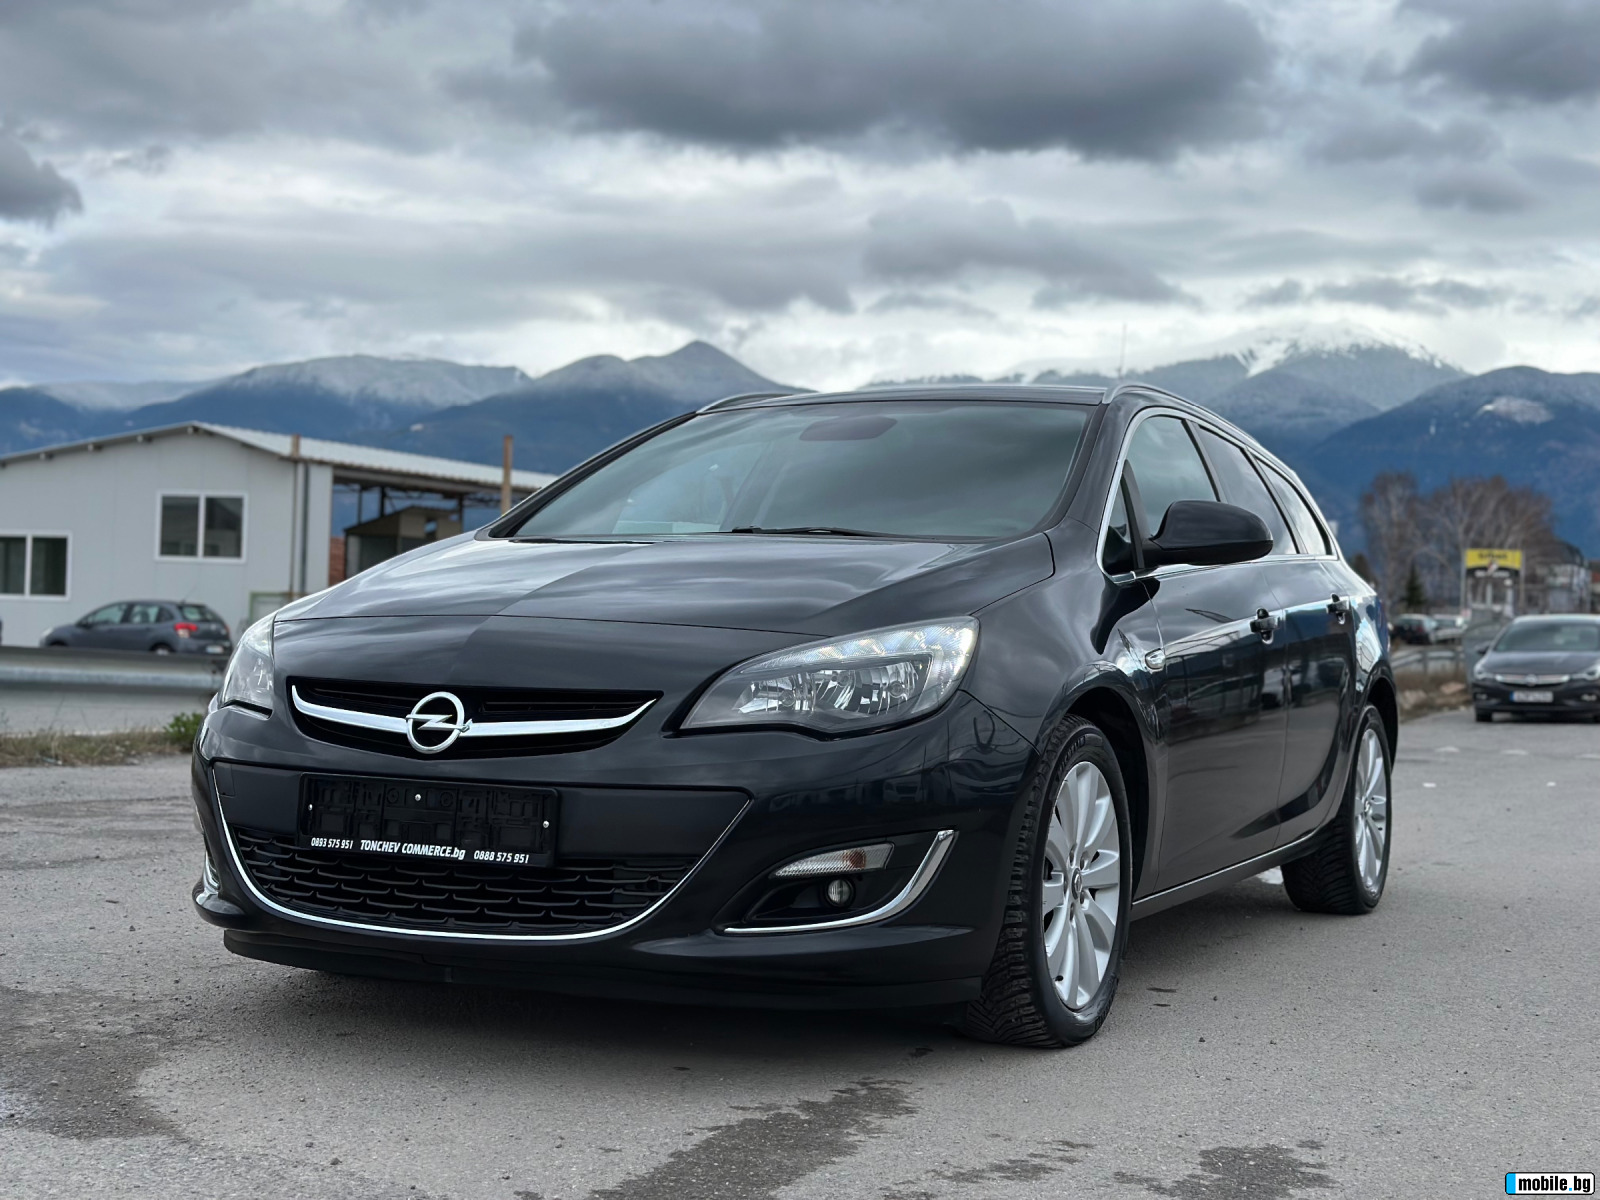 Opel Astra 1.7-CDTI-FACE-123.000km-6-speed-LED-TOP-NEW | Mobile.bg   3